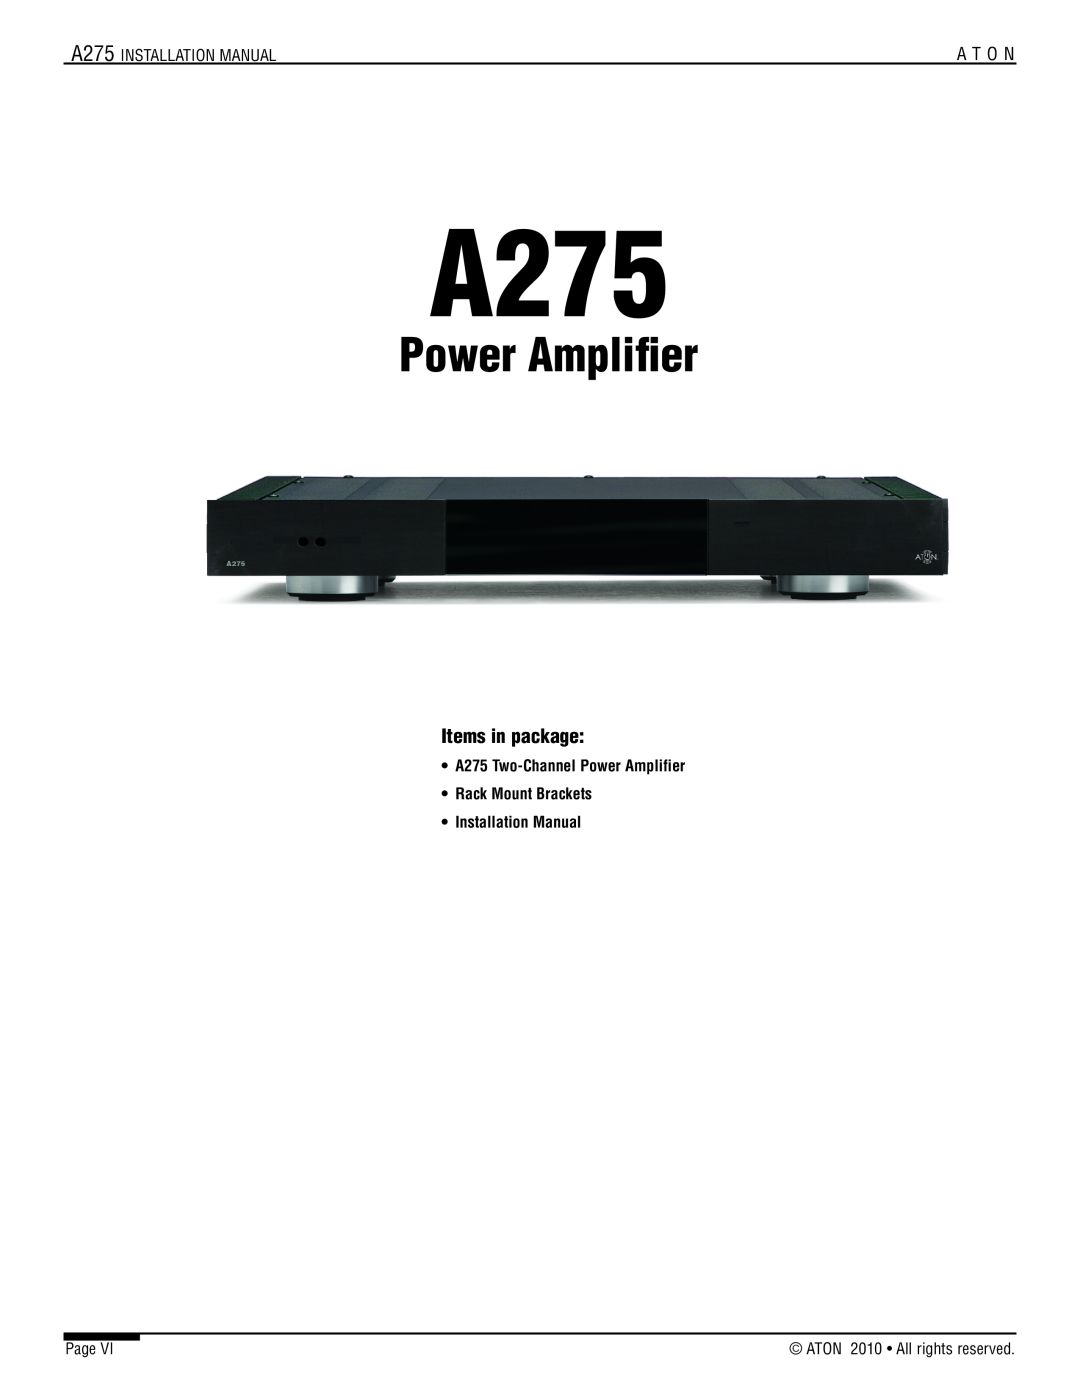 ATON installation manual Items in package, A275 Two-ChannelPower Amplifier, Rack Mount Brackets Installation Manual 